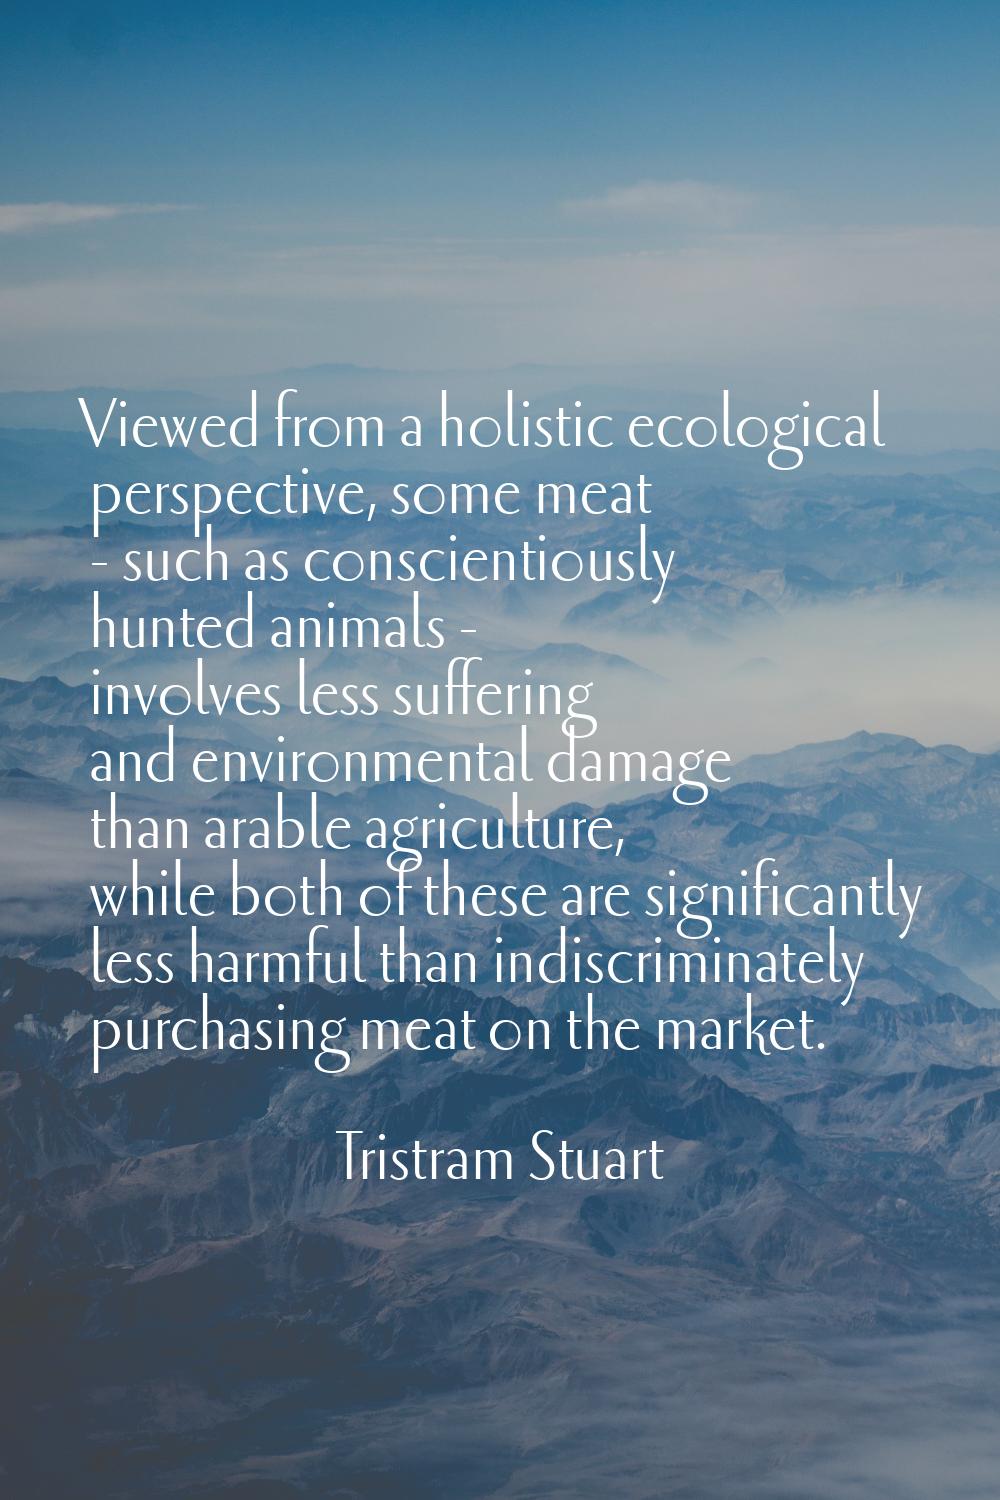 Viewed from a holistic ecological perspective, some meat - such as conscientiously hunted animals -